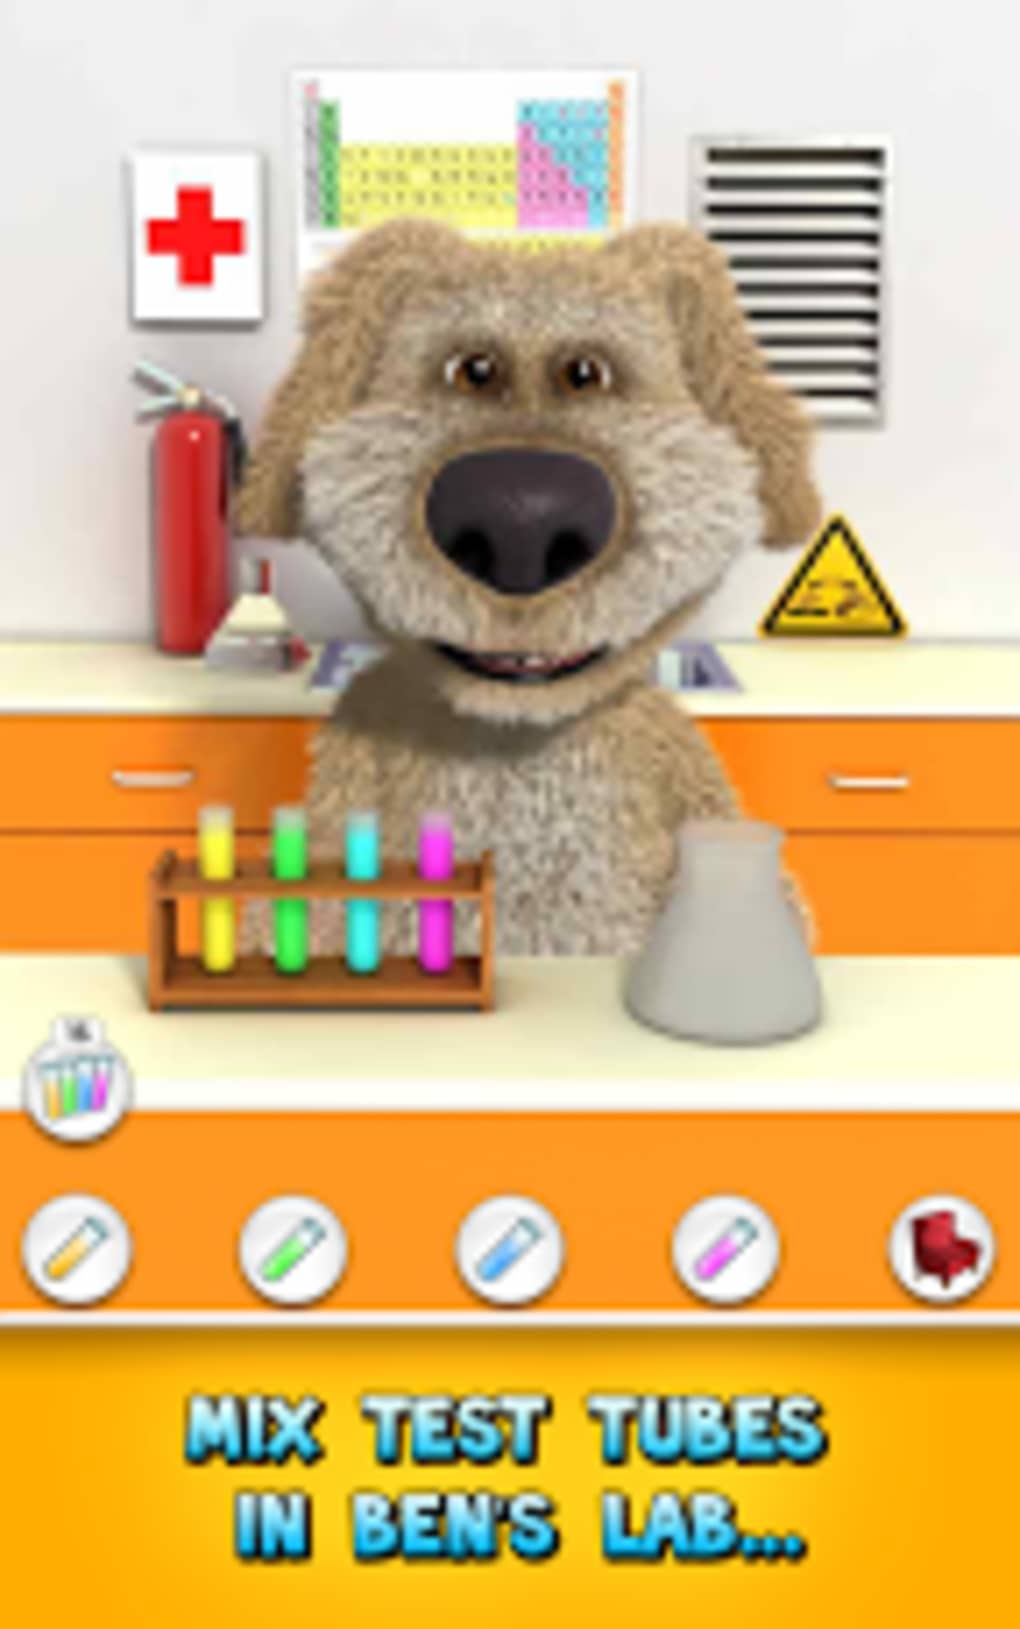 Talking Ben the Dog 3.9.1.44 (arm-v7a) (nodpi) (Android 4.4+) APK Download  by Outfit7 Limited - APKMirror